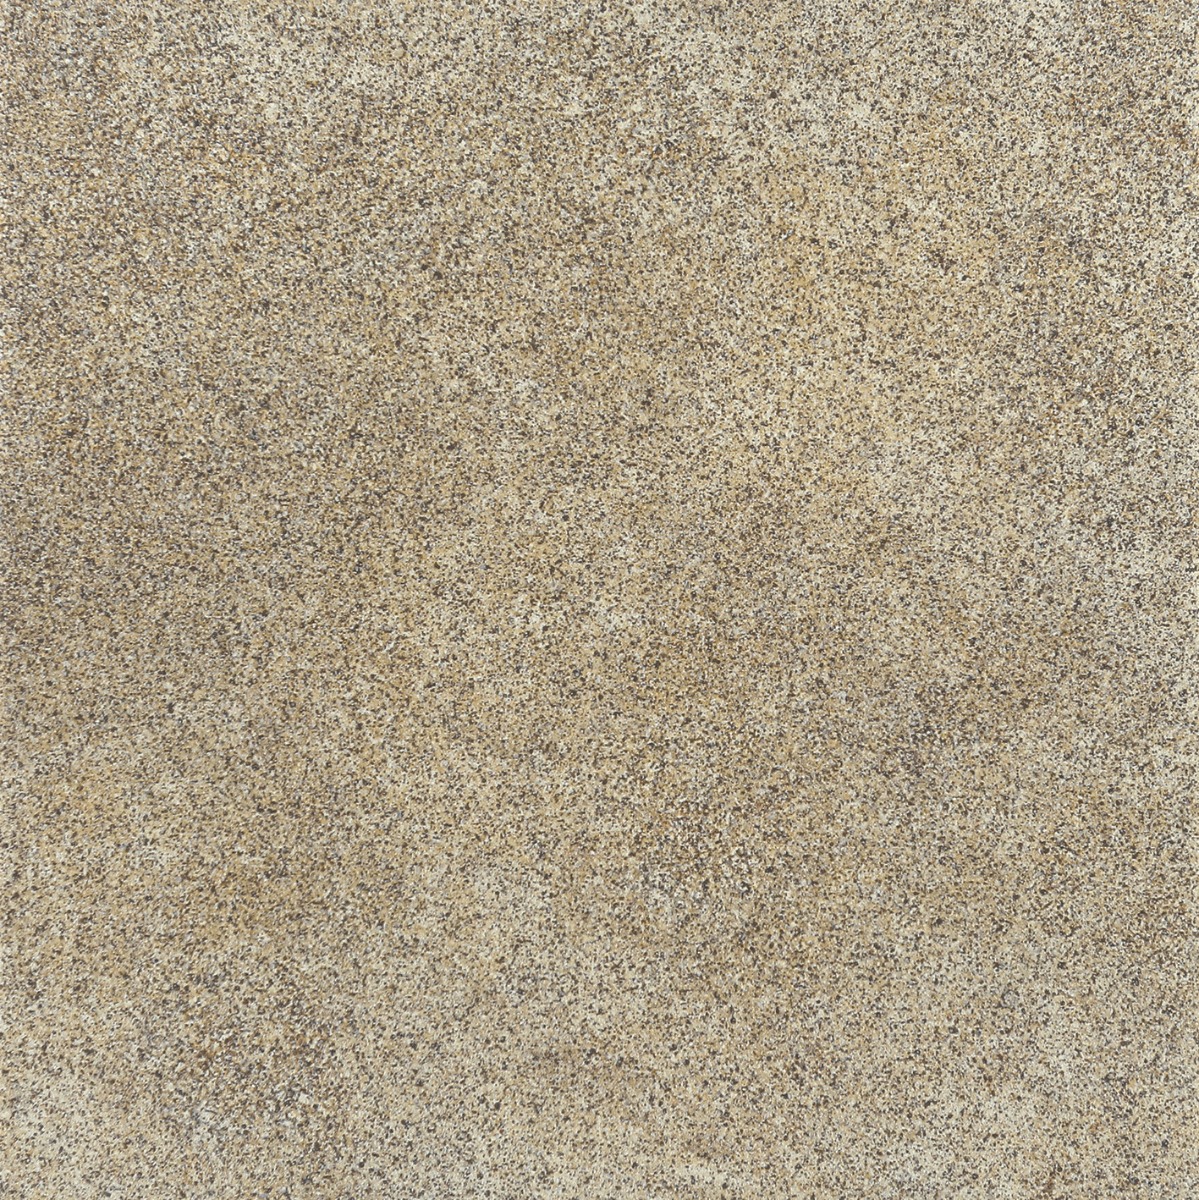 Vitrified Tiles for Parking Tiles, Pathway Tiles, Outdoor Area, Outdoor/Terrace, Porch/Parking